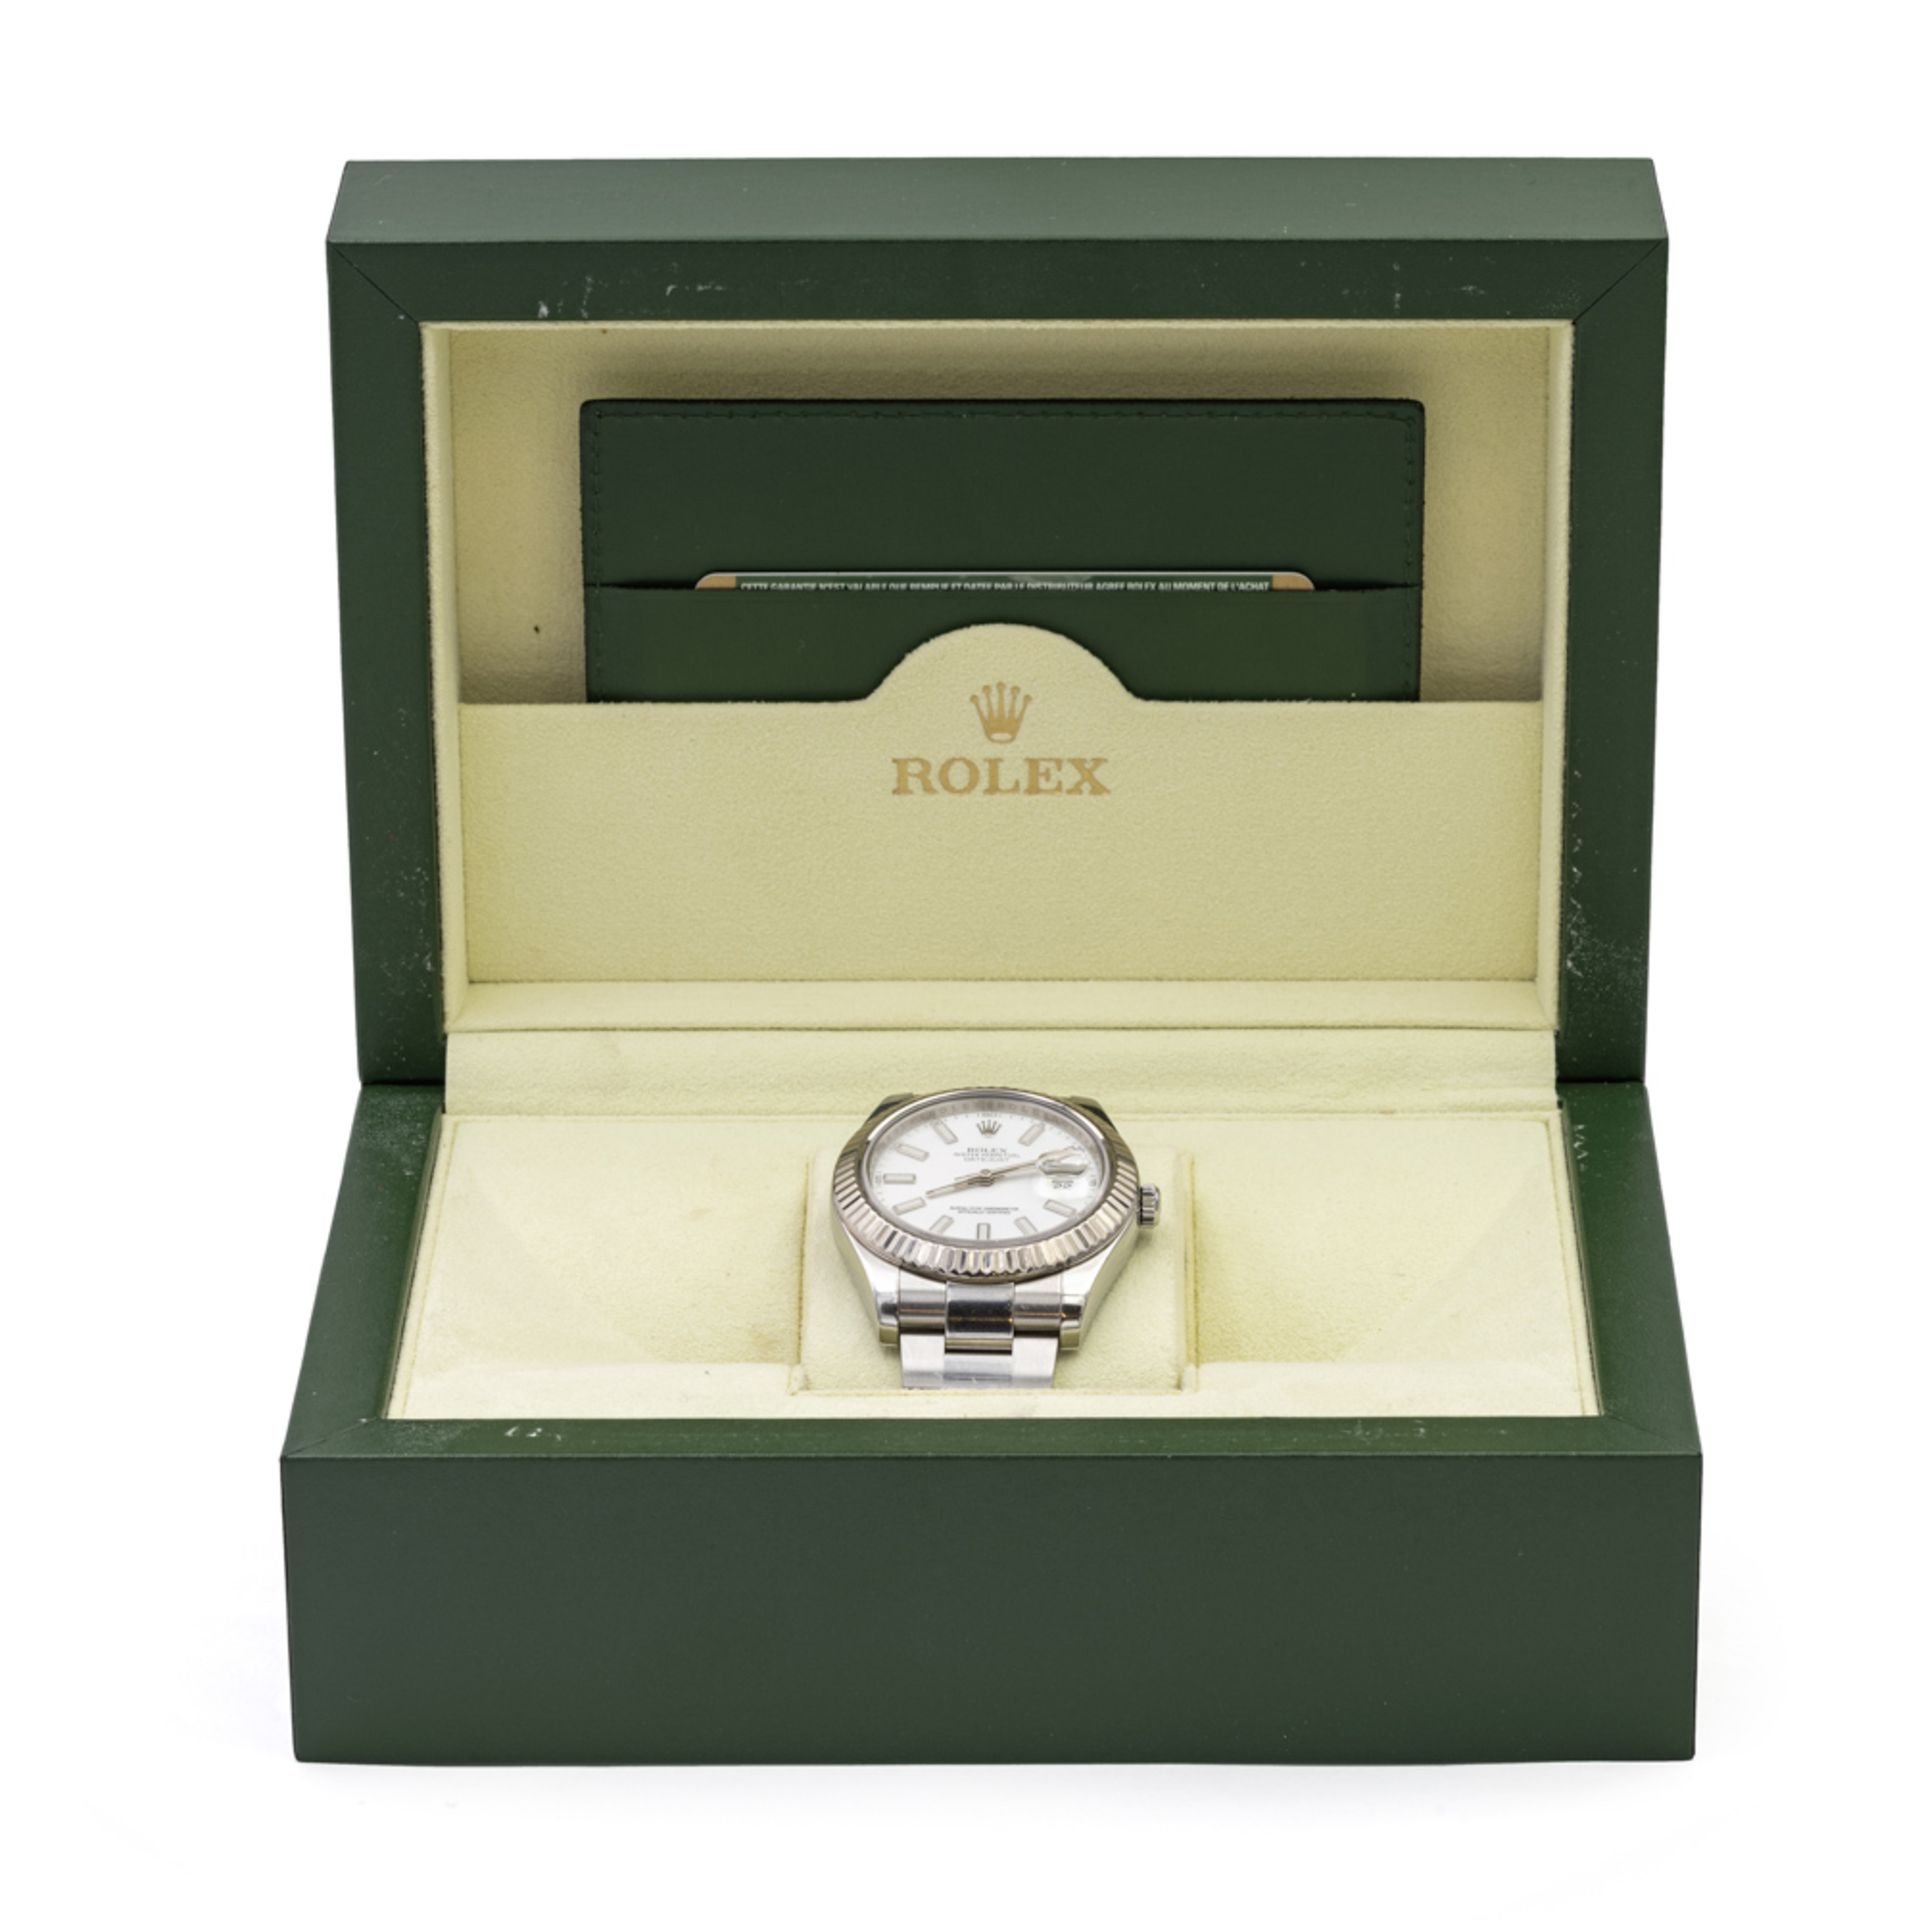 Rolex Oyster Perpetual Datejust II, wristwatch - Image 2 of 2